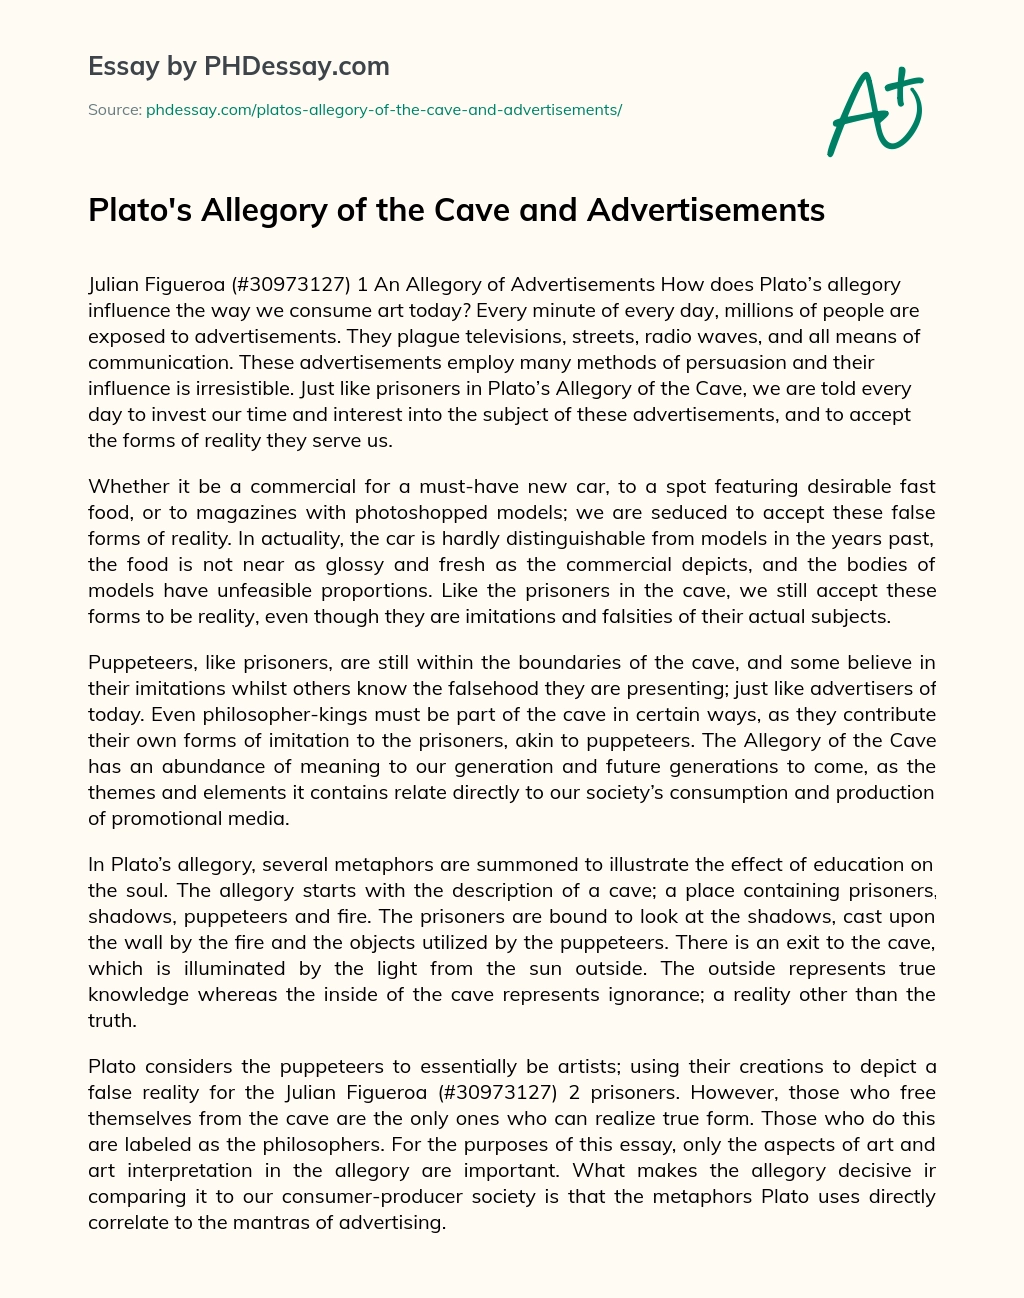 Plato’s Allegory of the Cave and Advertisements essay